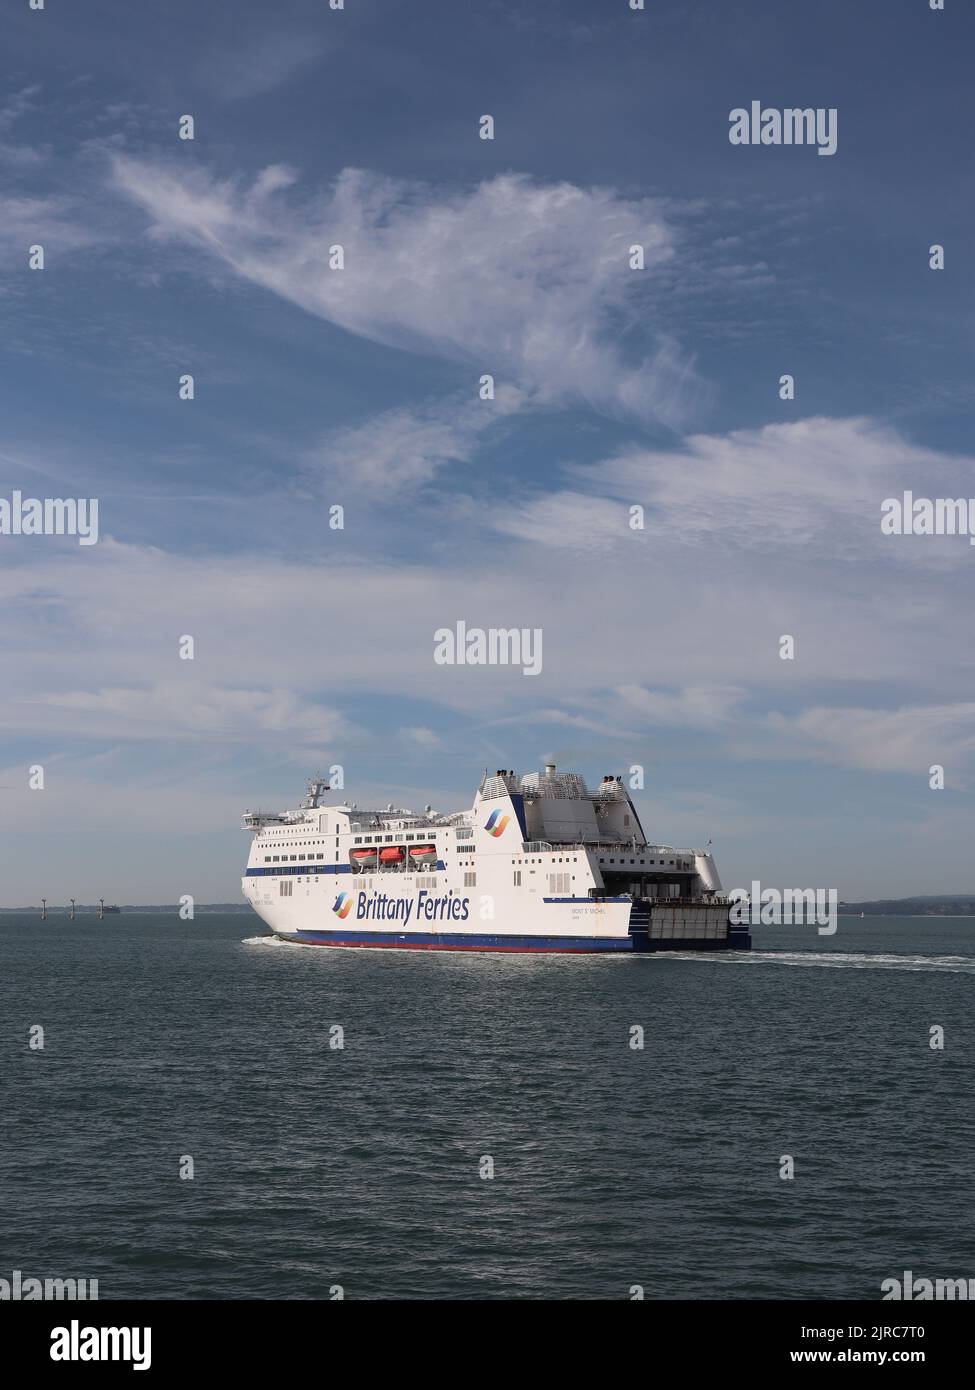 The Brittany Ferries ship MONT ST MICHEL leaves harbour heading for Caen, France Stock Photo